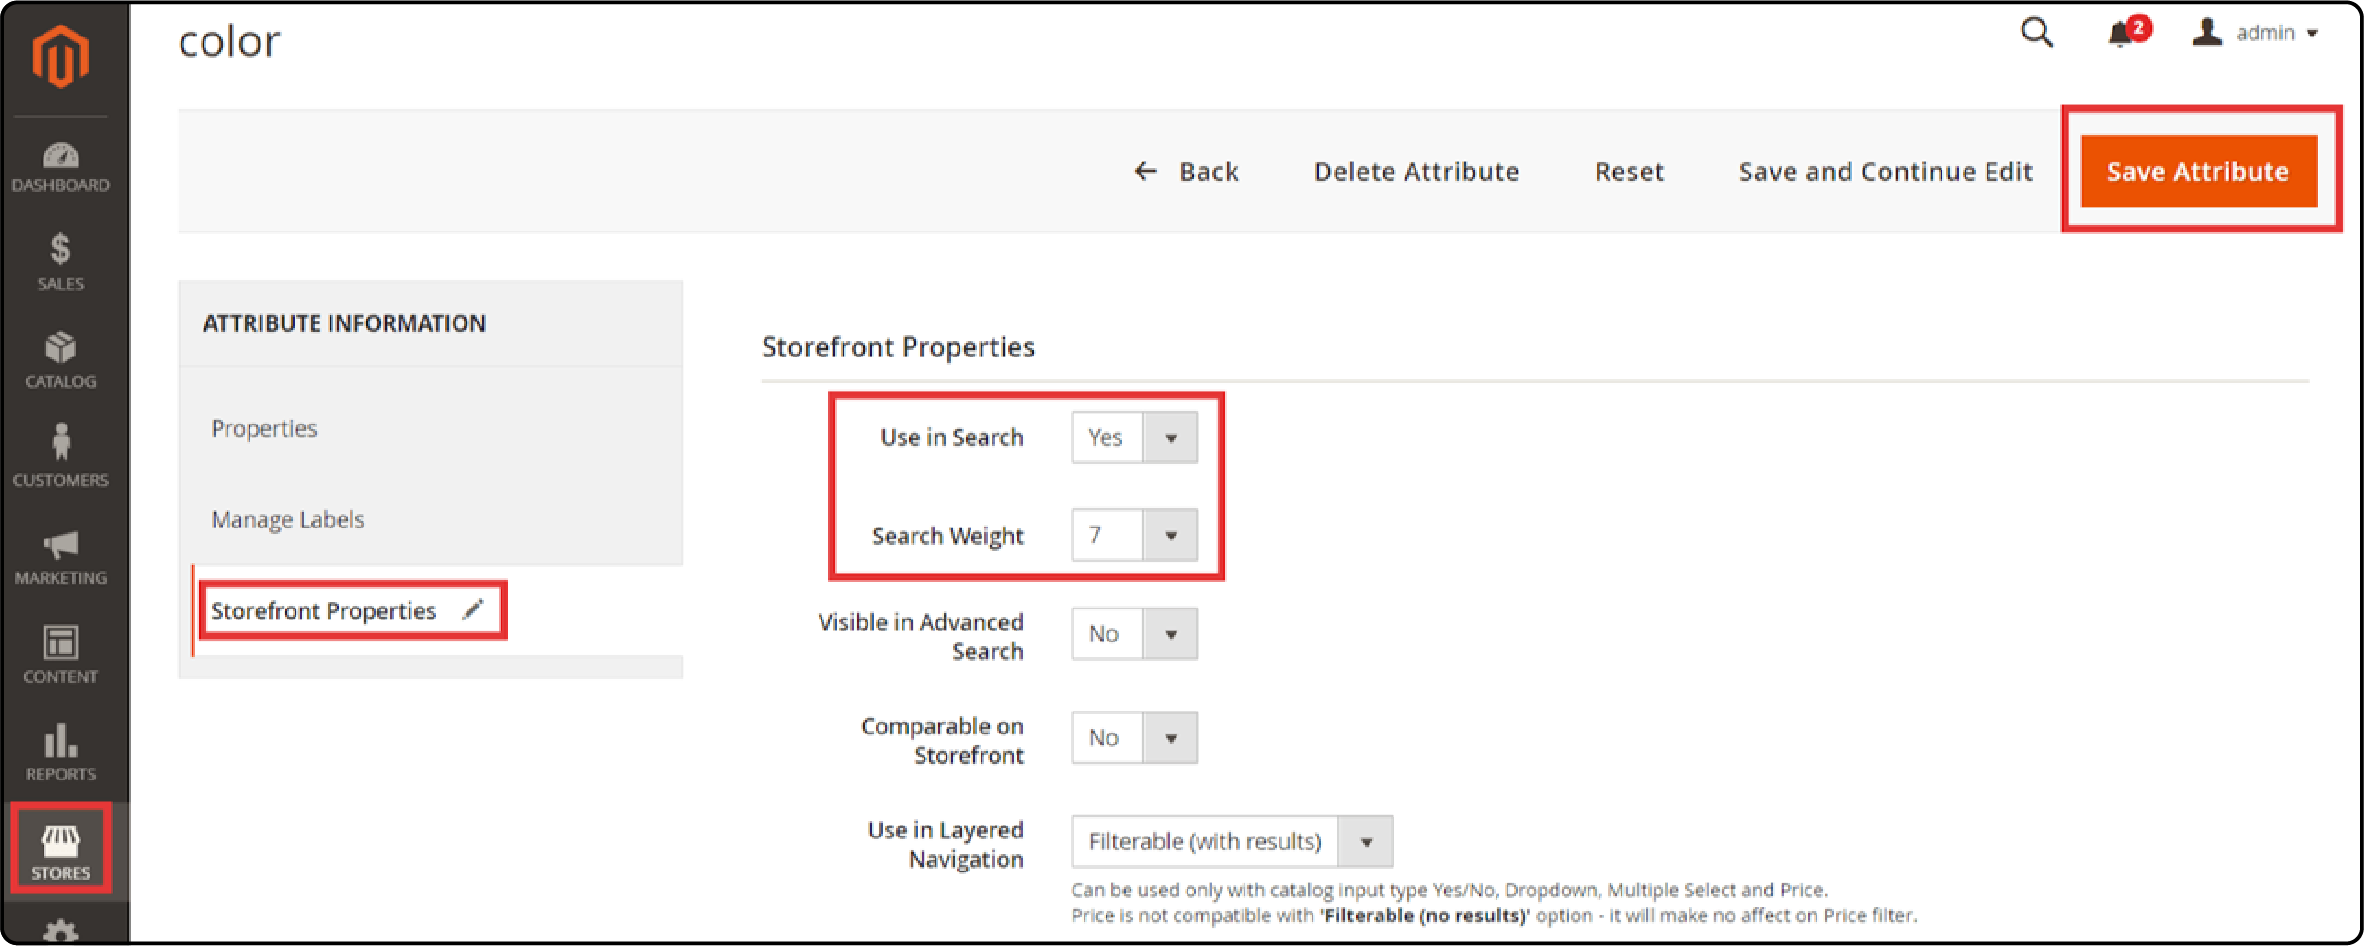 Configuring search weight settings from 1 to 10 and saving changes in Magento 2